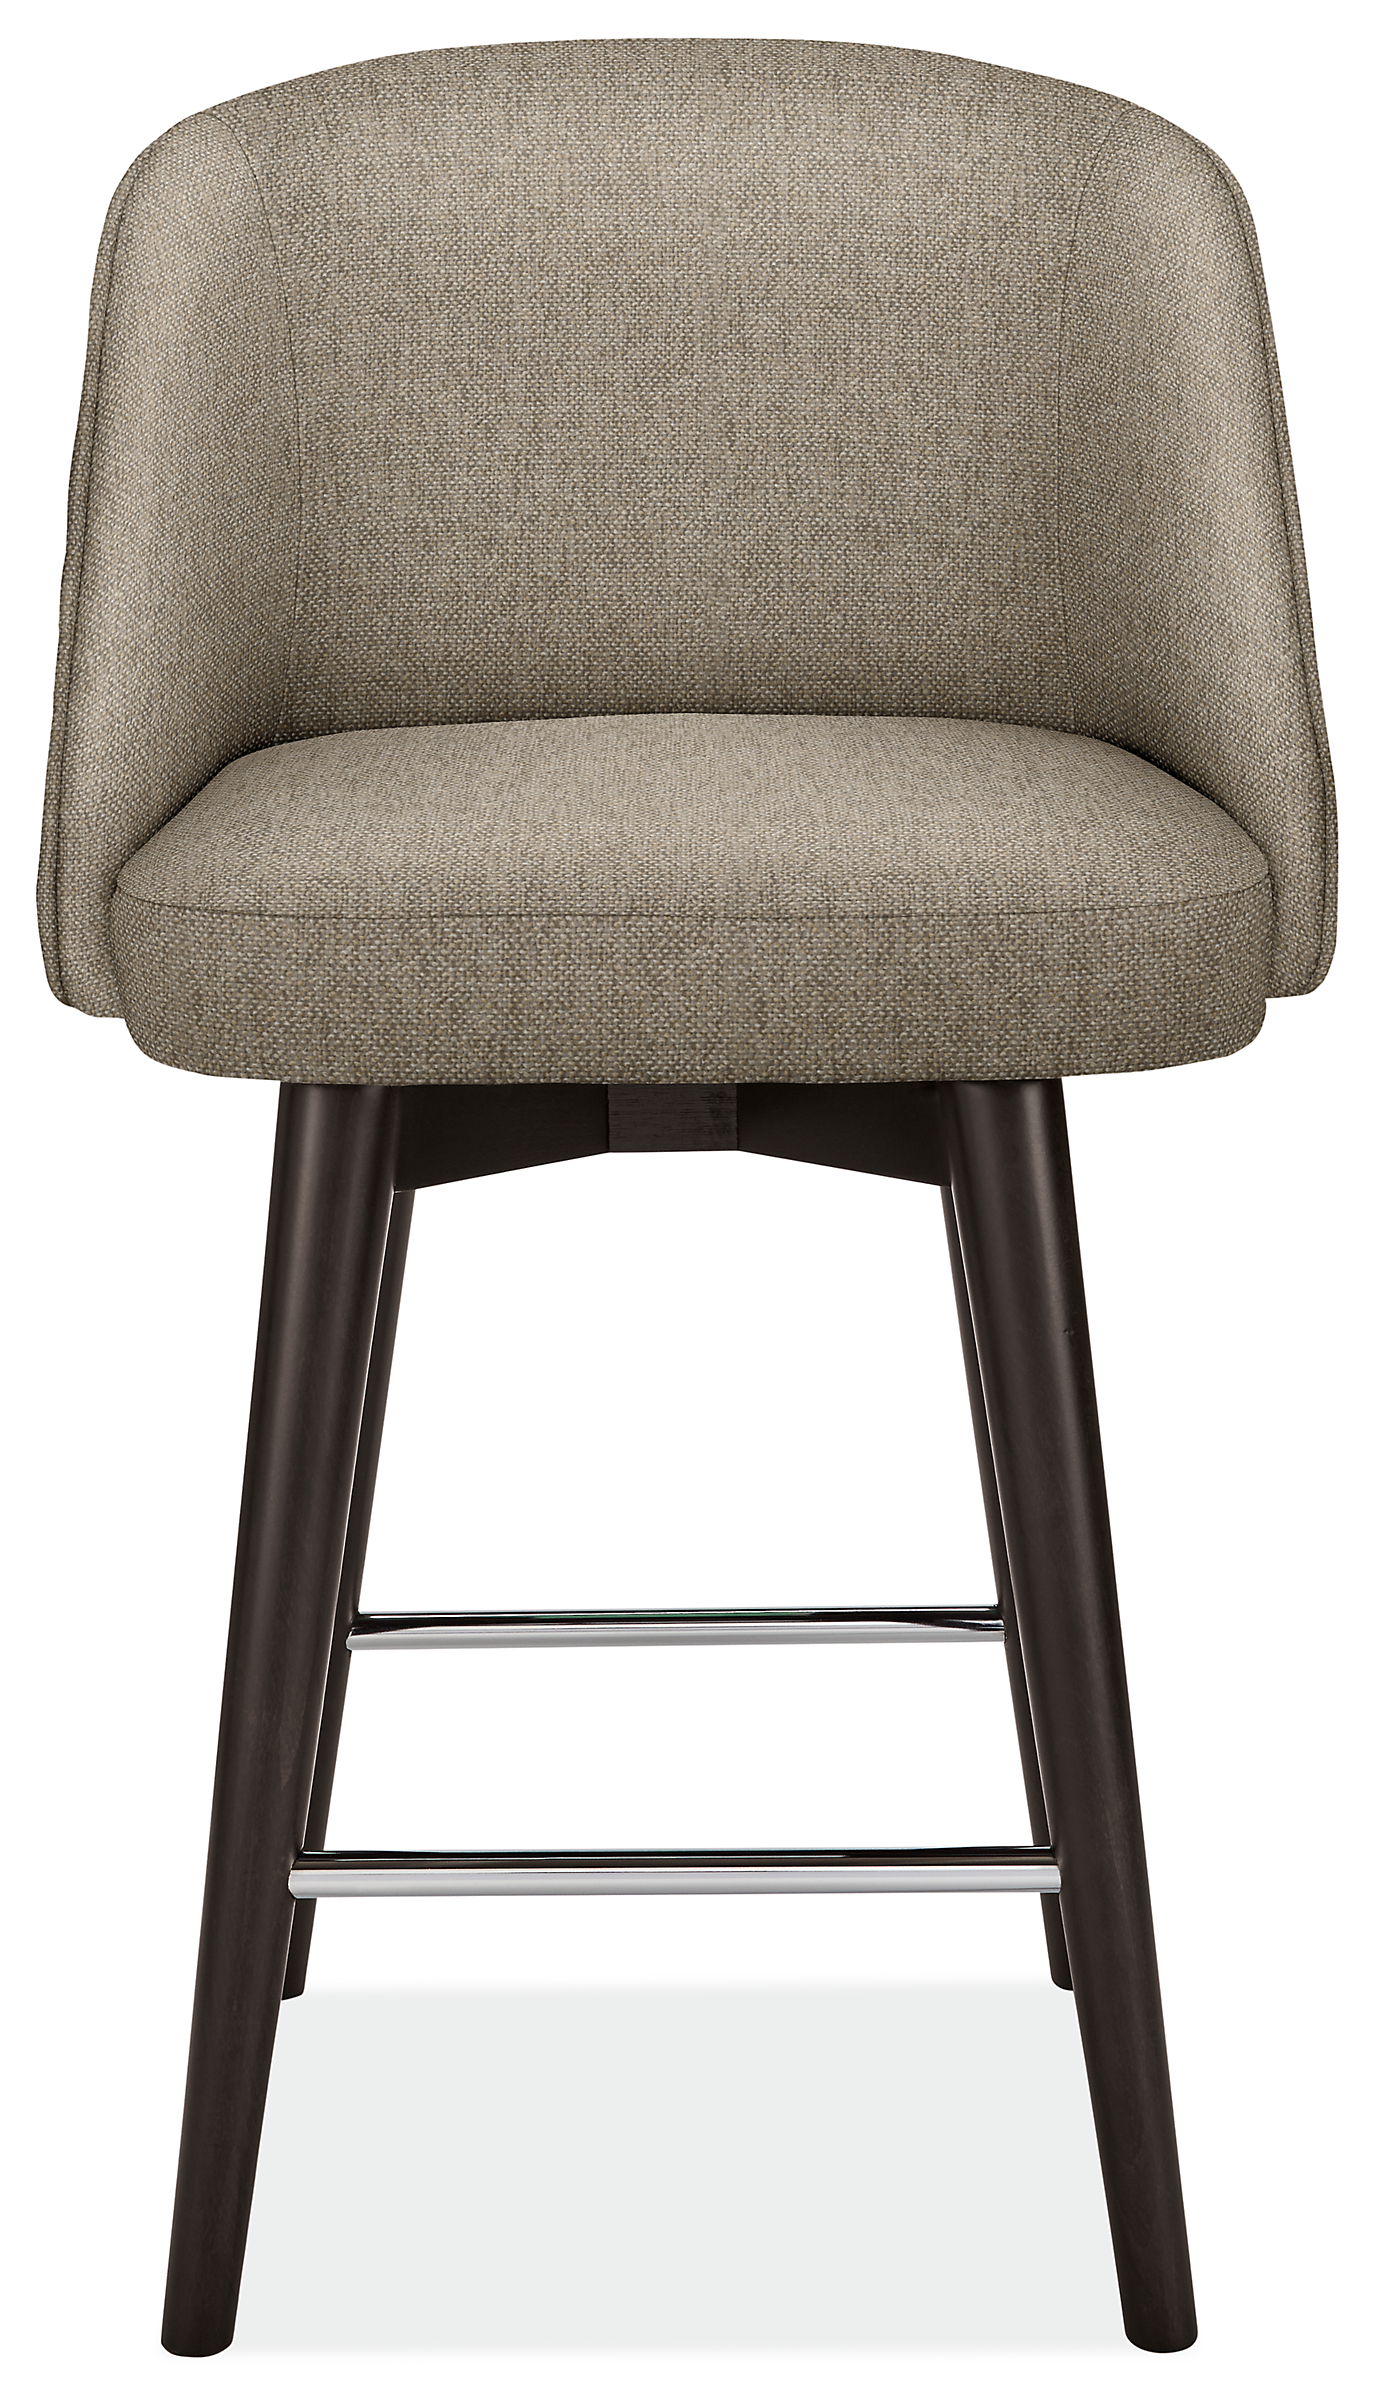 Front view of Cora Swivel Counter Stool in Tatum Grey.